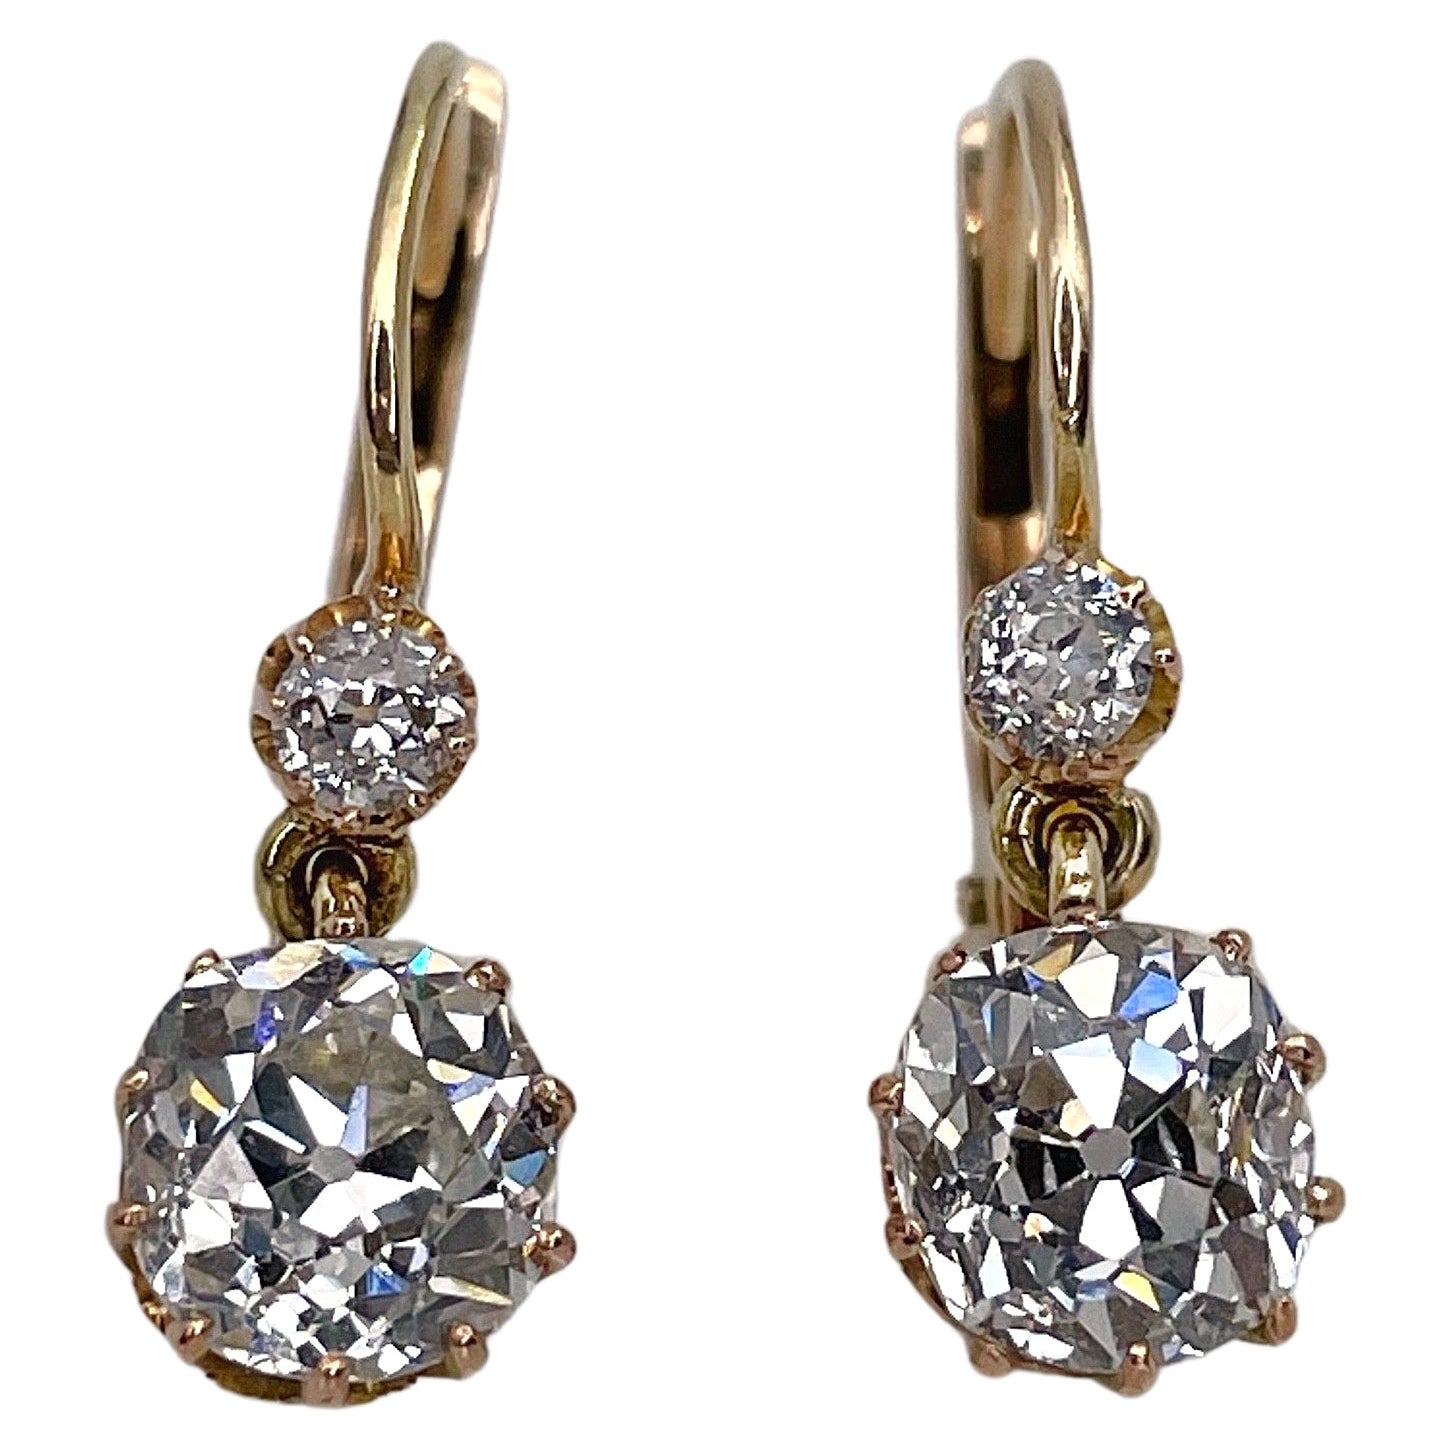 Antique Victorian 14K Gold Old Cut 2.30ct Diamond Dormeuse Earrings